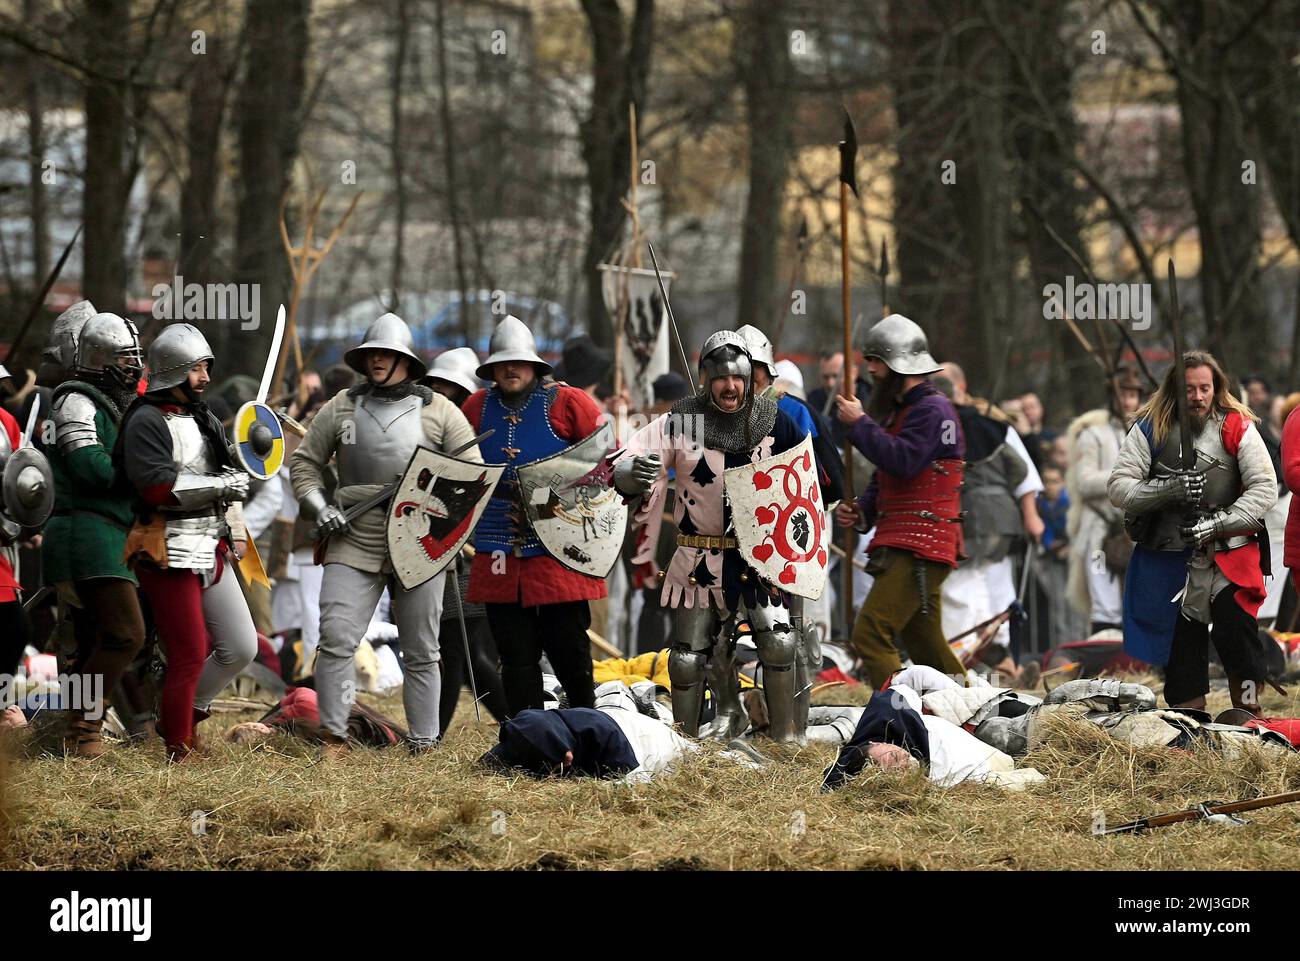 Donja Stubica, Croatia, 100224. Reconstruction of the historical battle between the serfs led by Matija Gubec and the army of the Hungarian-Croatian nobleman Ferenc Franjo Tahi from 1573, which marks the 451st anniversary of the Peasants Revolt in Donja Stubica. Photo: Ronald Gorsic / CROPIX Copyright: xxRonaldxGorsicx/xCROPIXx seljacka buna41-100224 Stock Photo